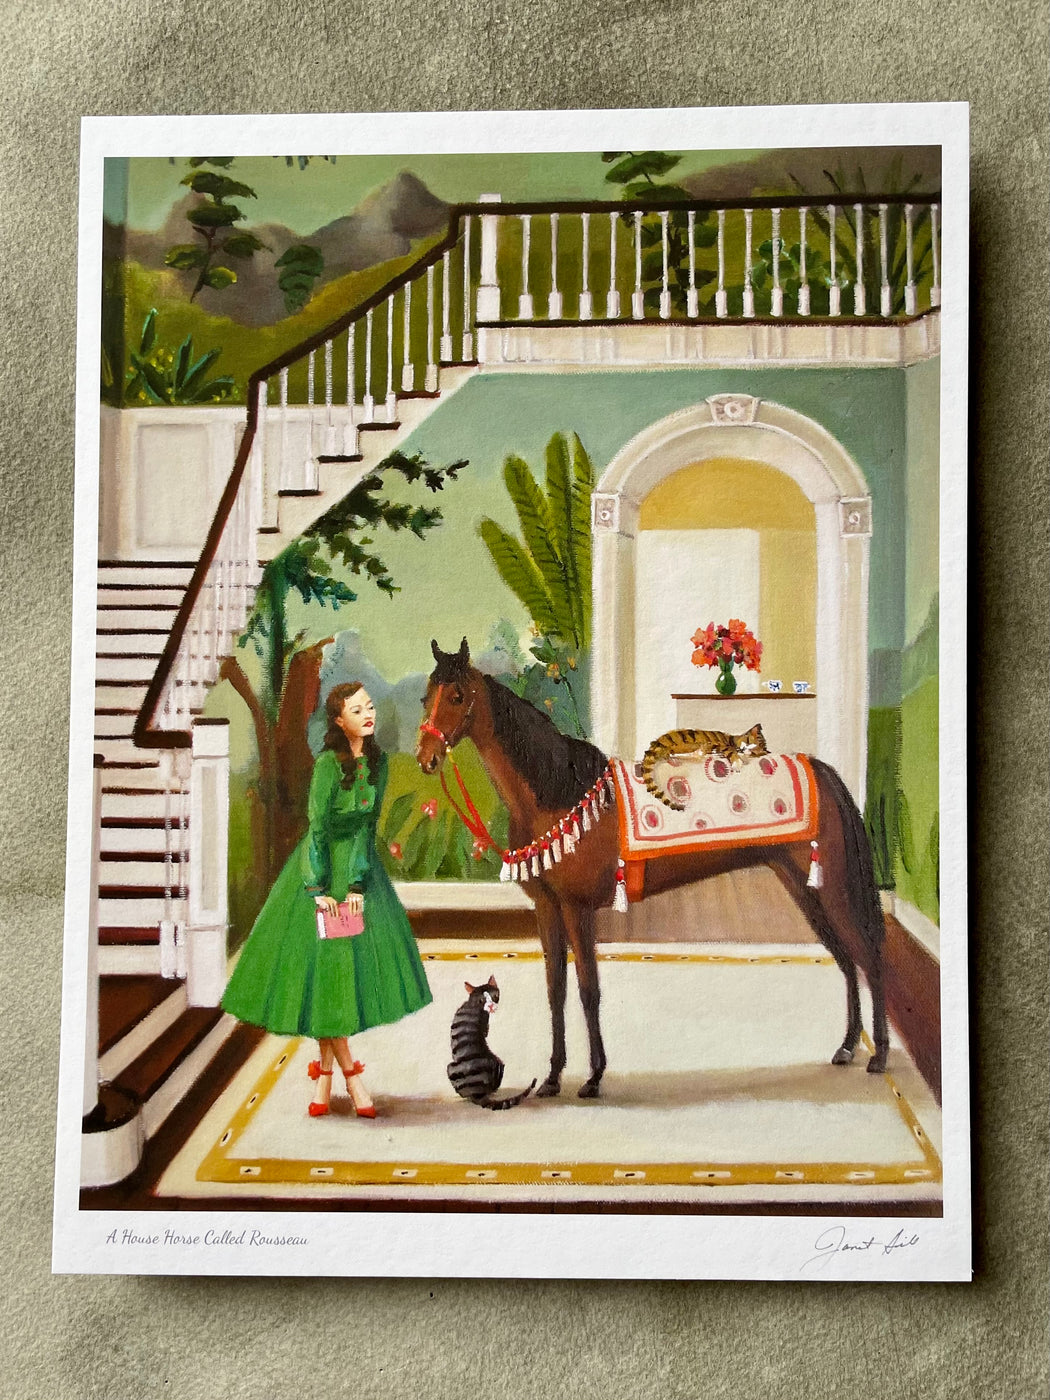 "A House Horse Called Rousseau" by Janet Hill